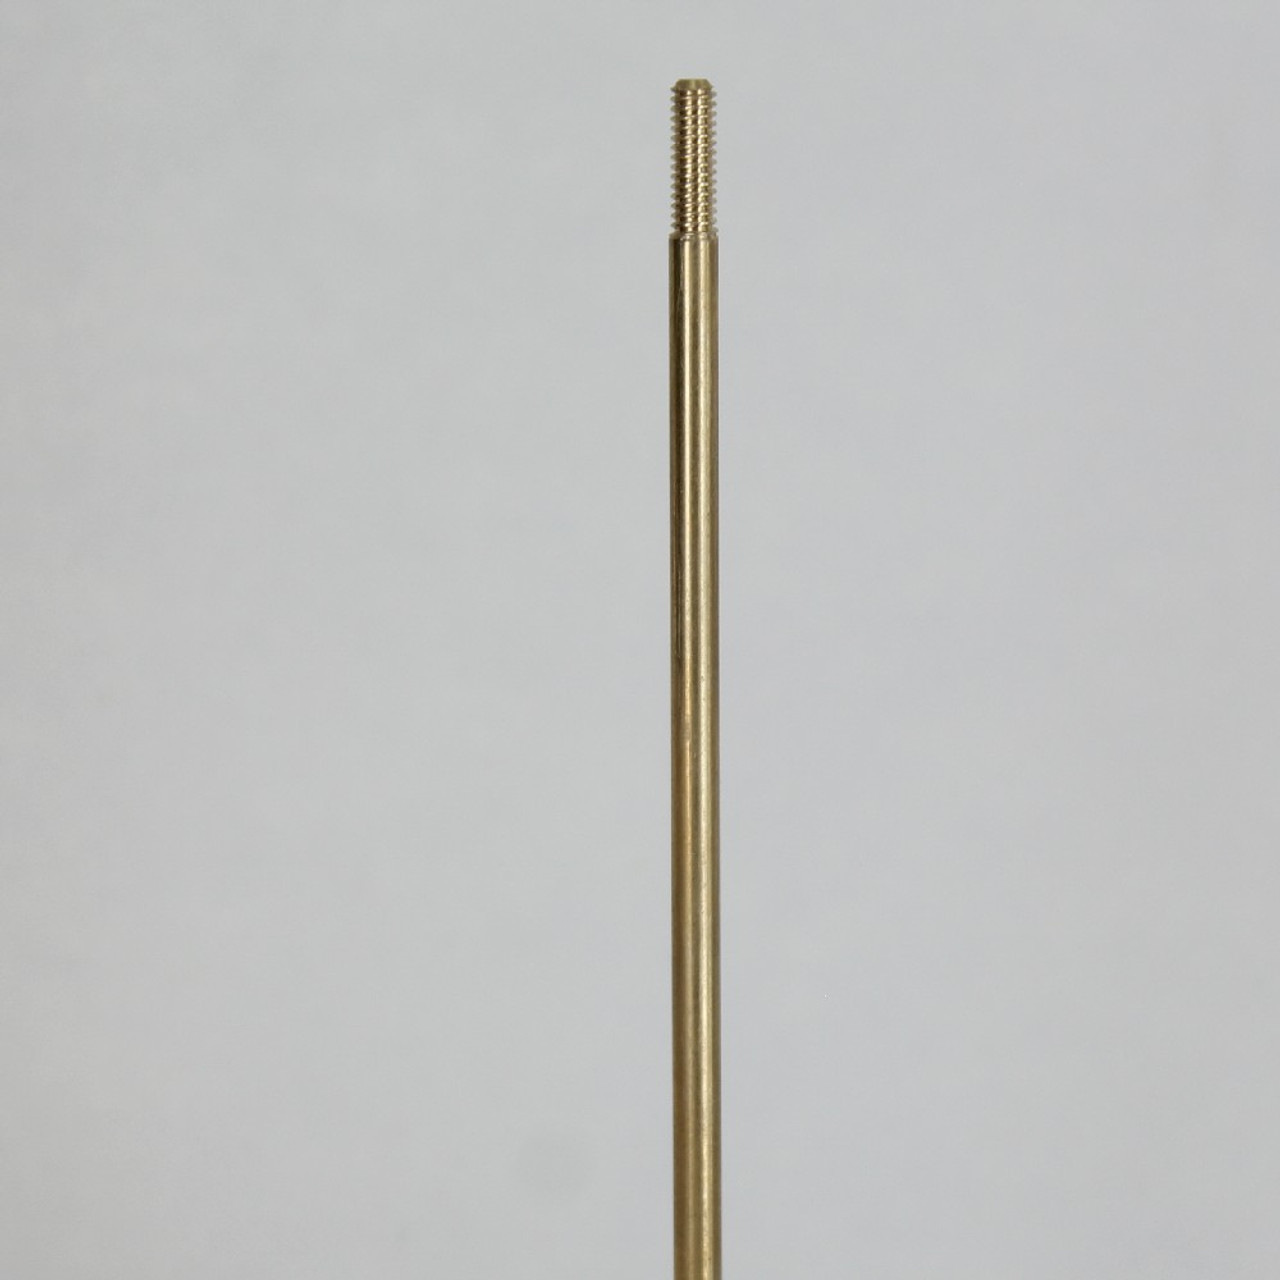 8 in. Long - 8/32 Threaded Brass Rod with 1/2in Long Thread on